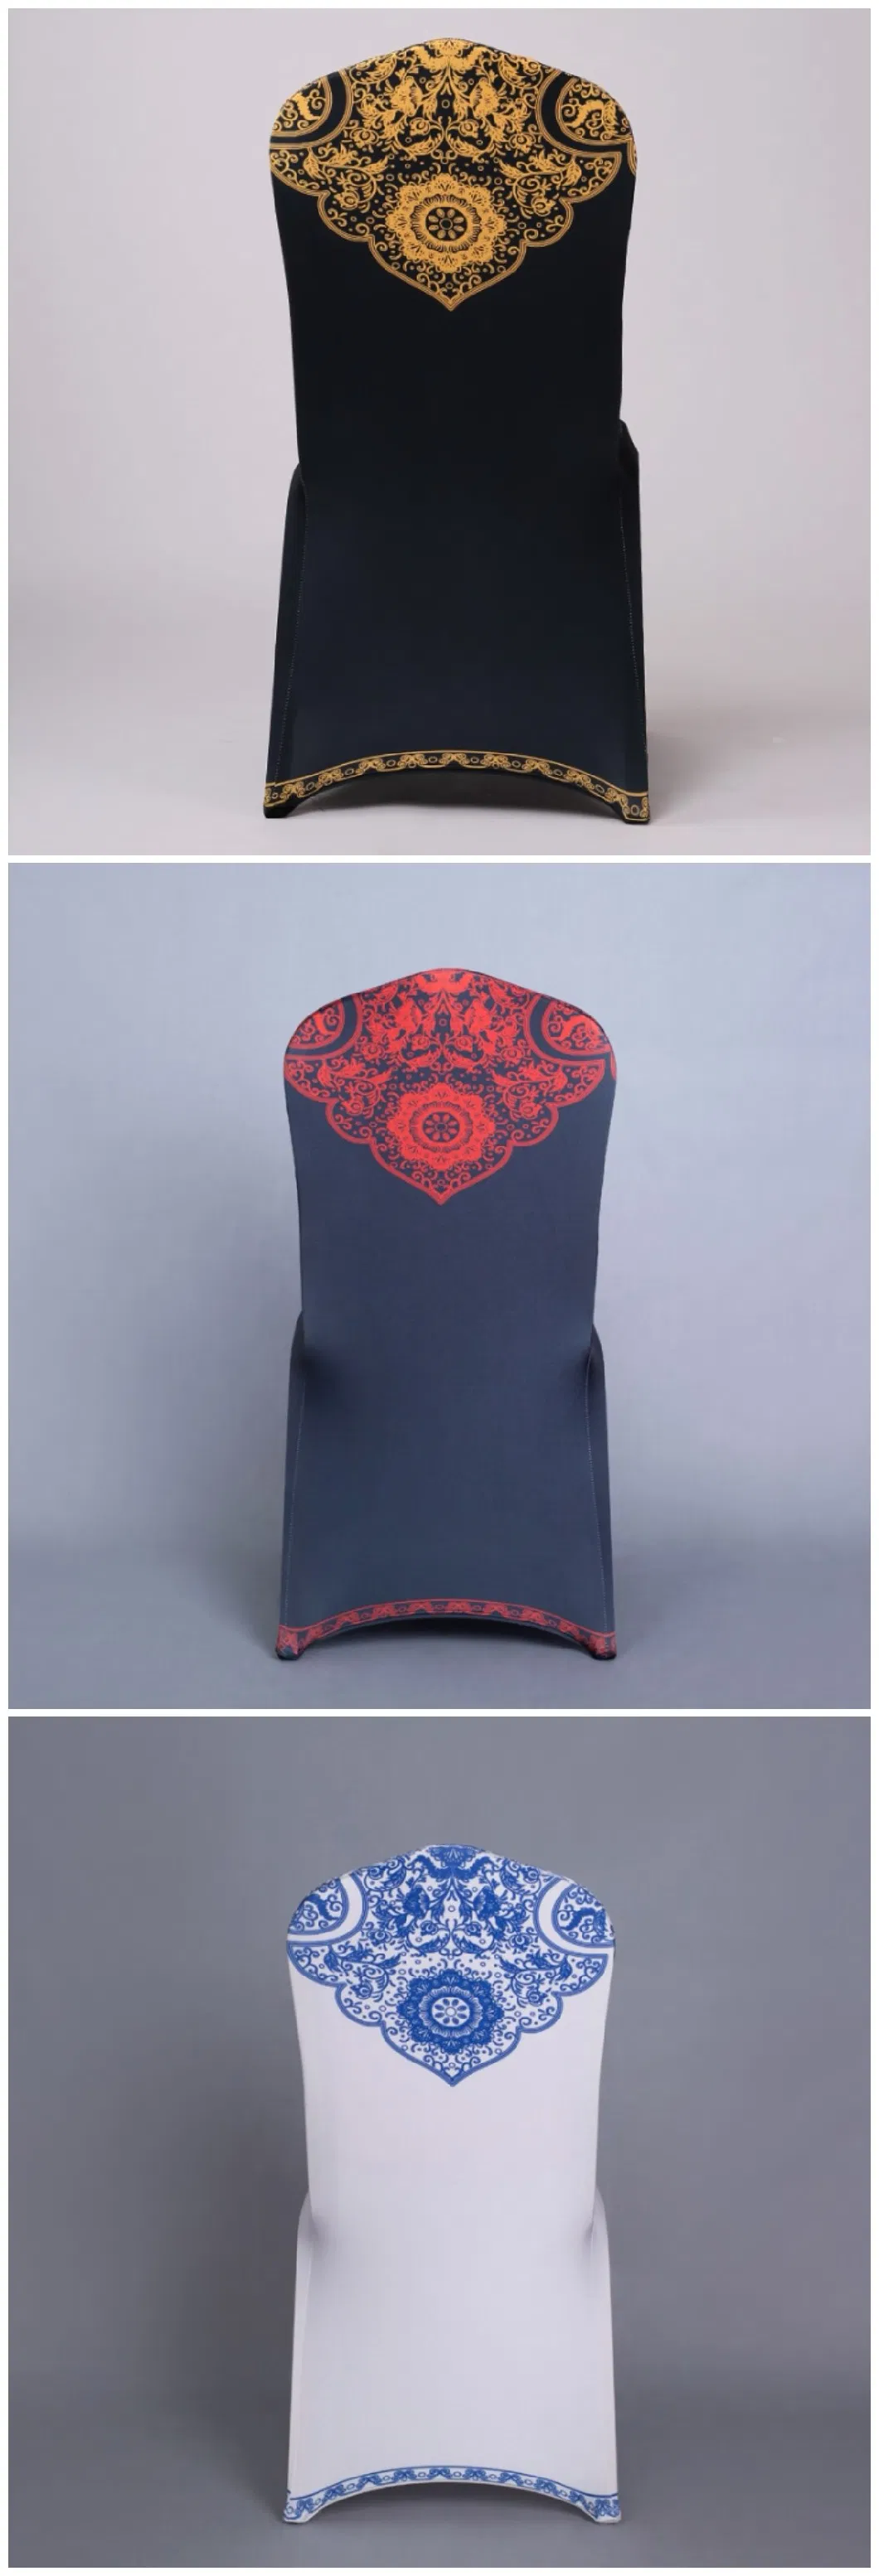 Yc-890 New Design Red Printed Stretch Spandex Chair Cover for Hotel Banquet Wedding